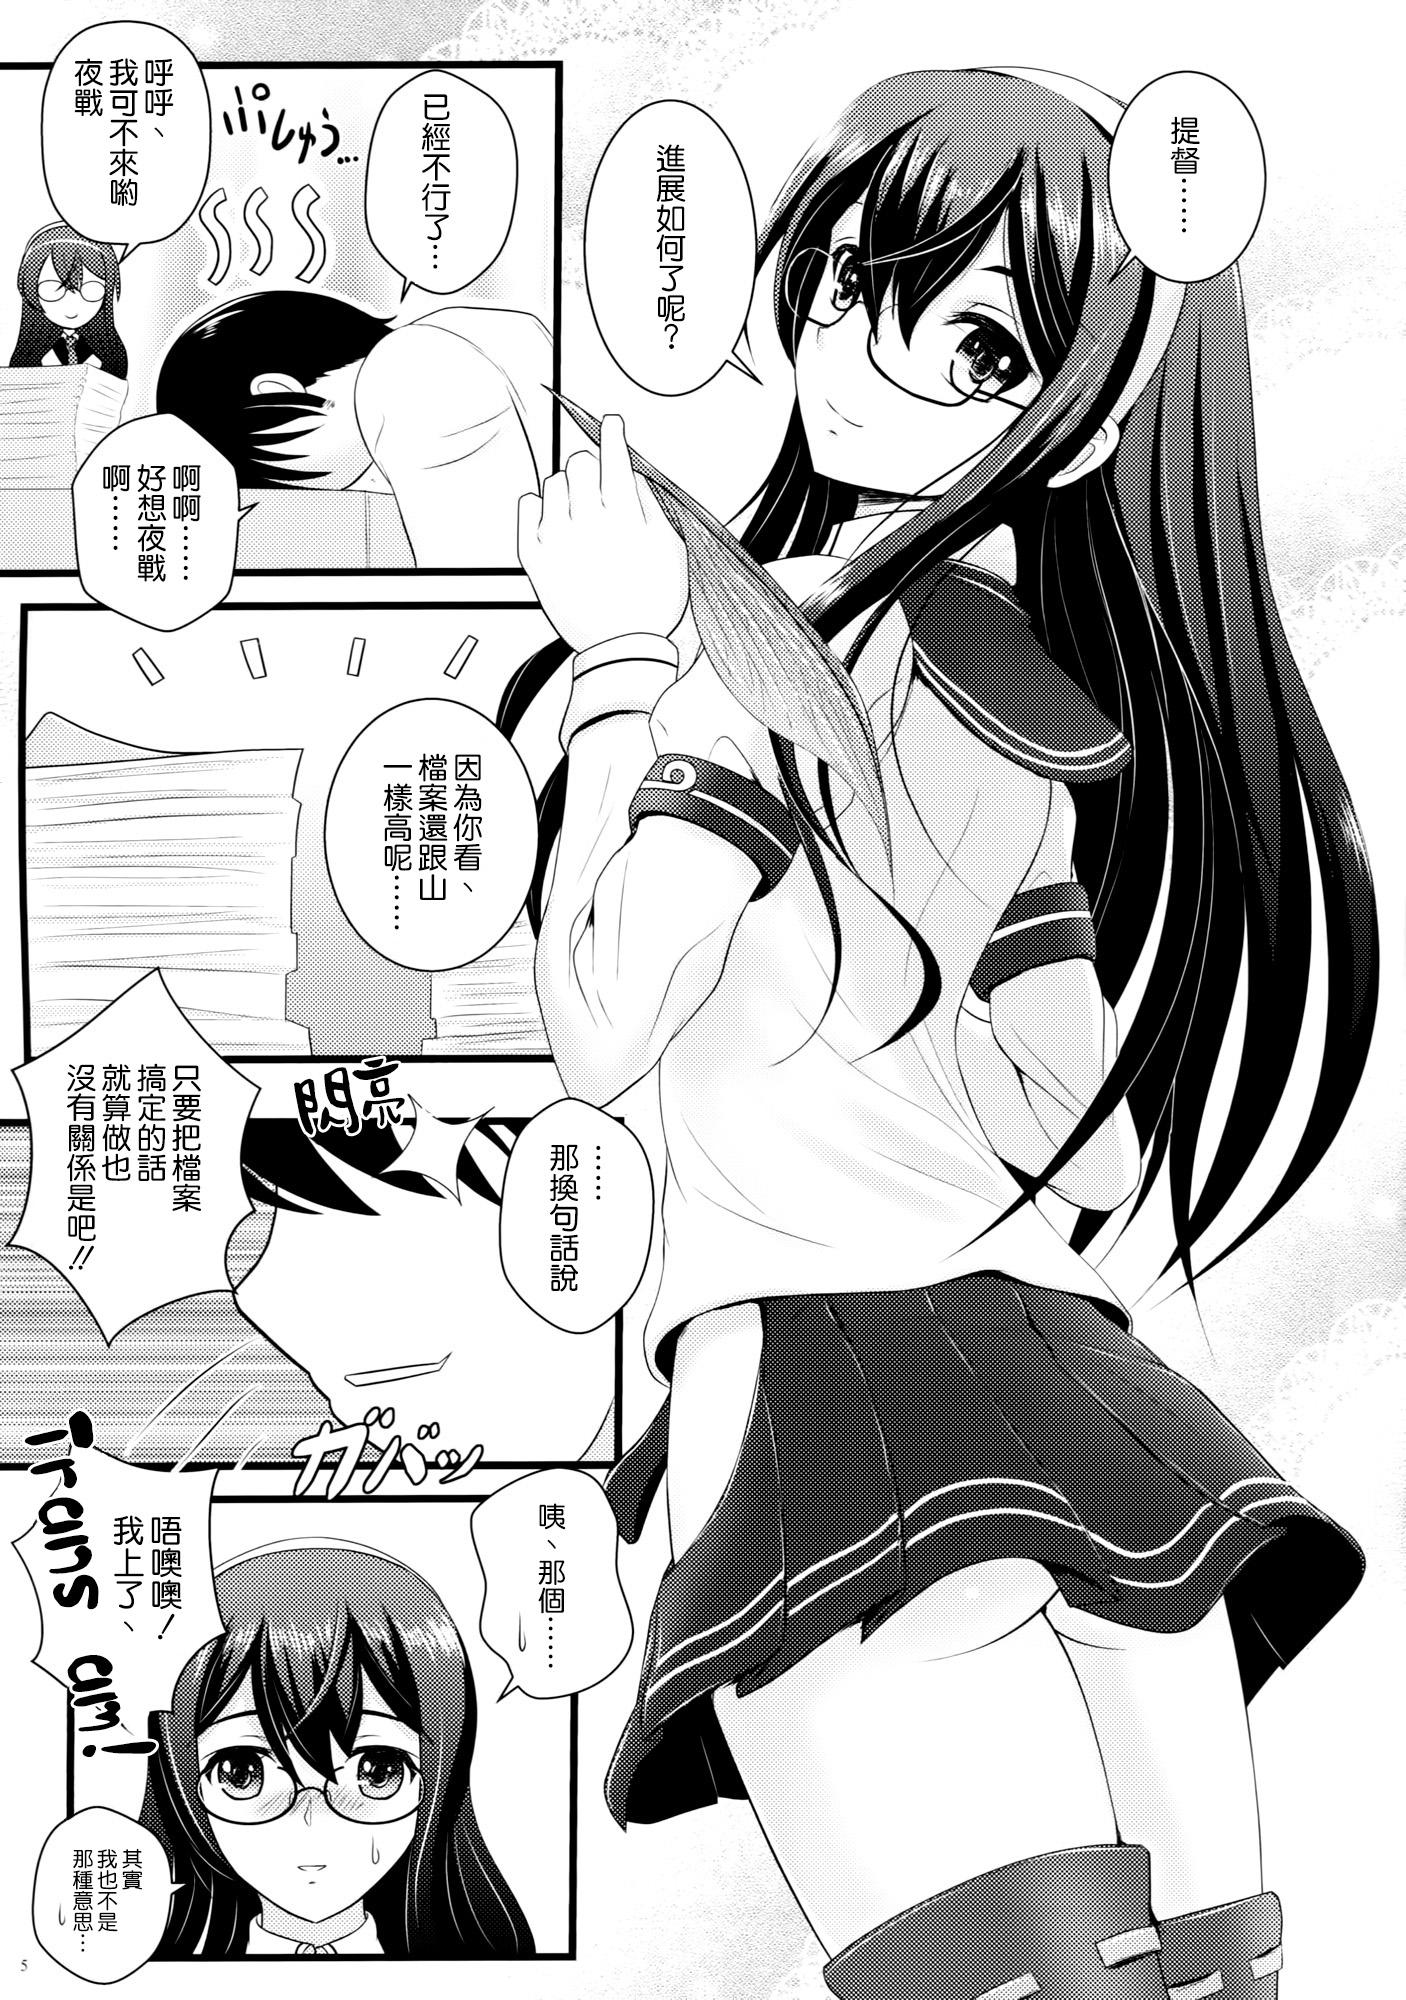 Mulher Private Secretary - Kantai collection Chilena - Page 5